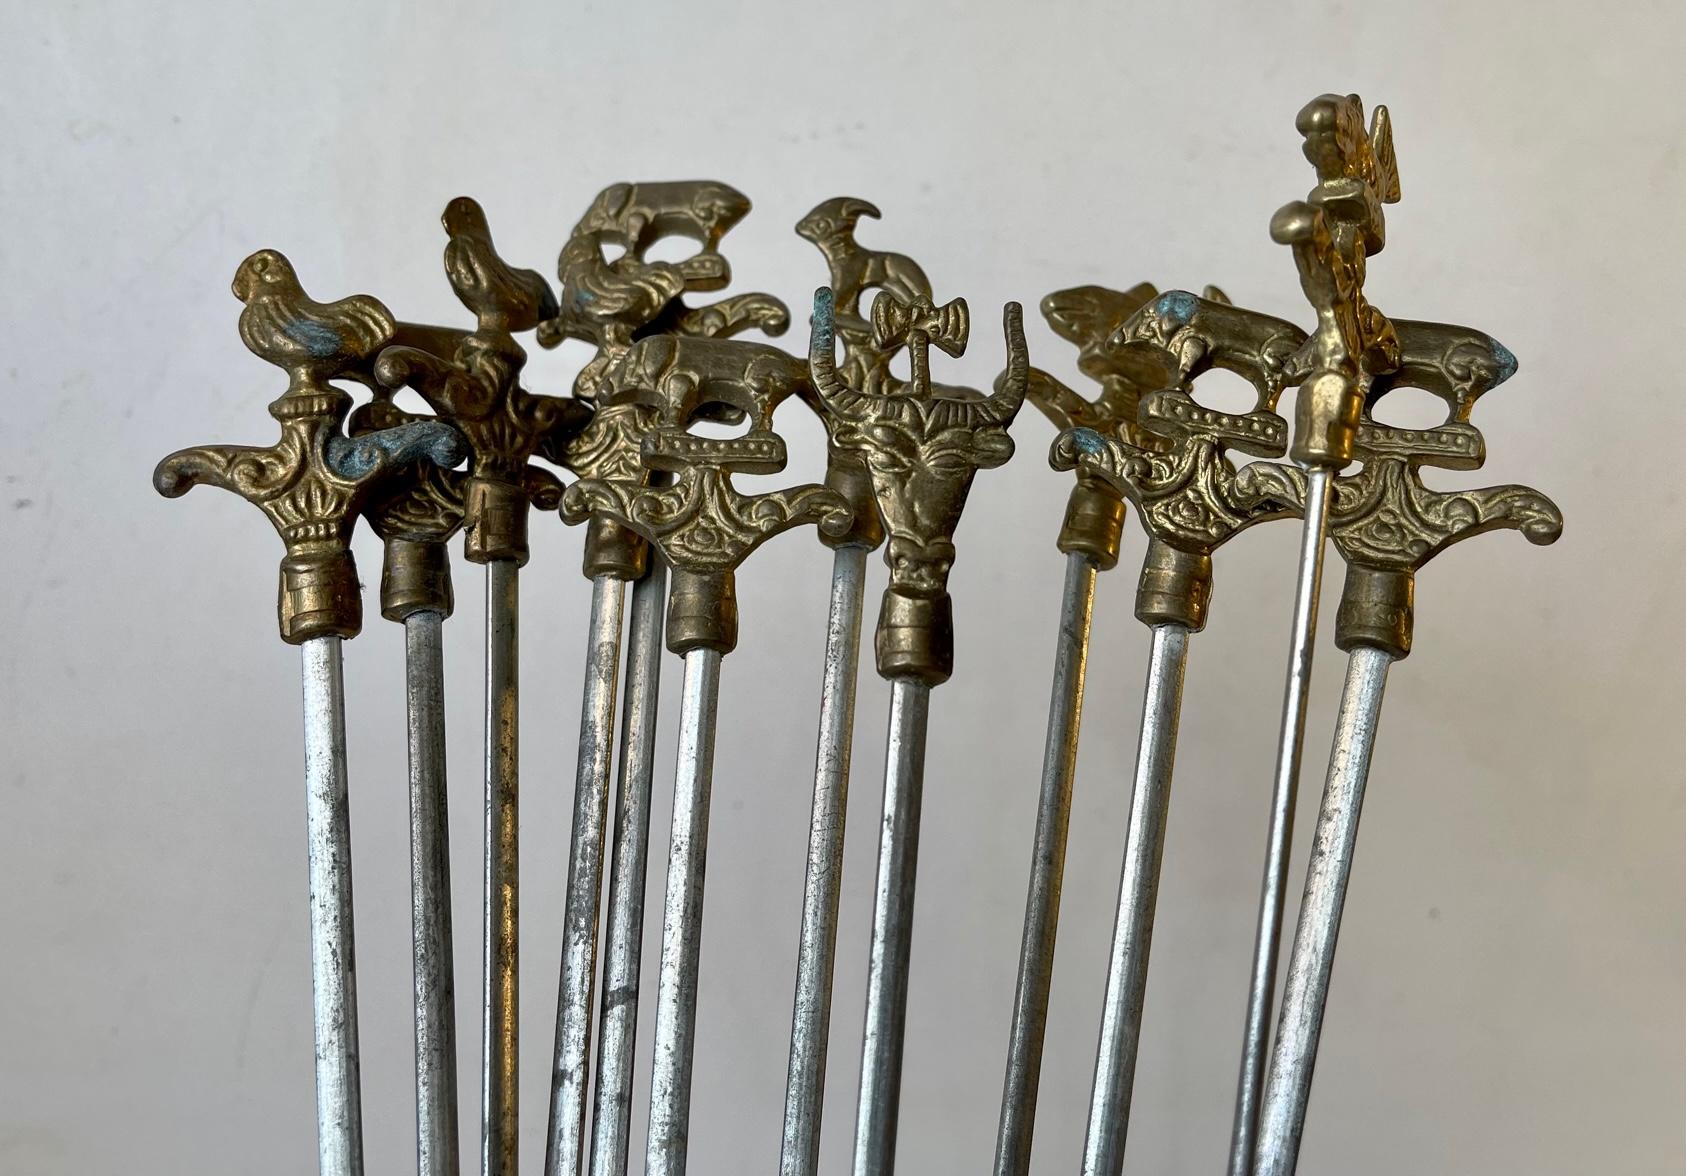 A set of 12 (+1) original Turkish sis kebab skewers. Made from practical flat stainless steel topped with handles of ornamented animals in brass. This set was manufactured by Serer in Istanbul Turkey during the 1960s or 1970s. The length of the 12